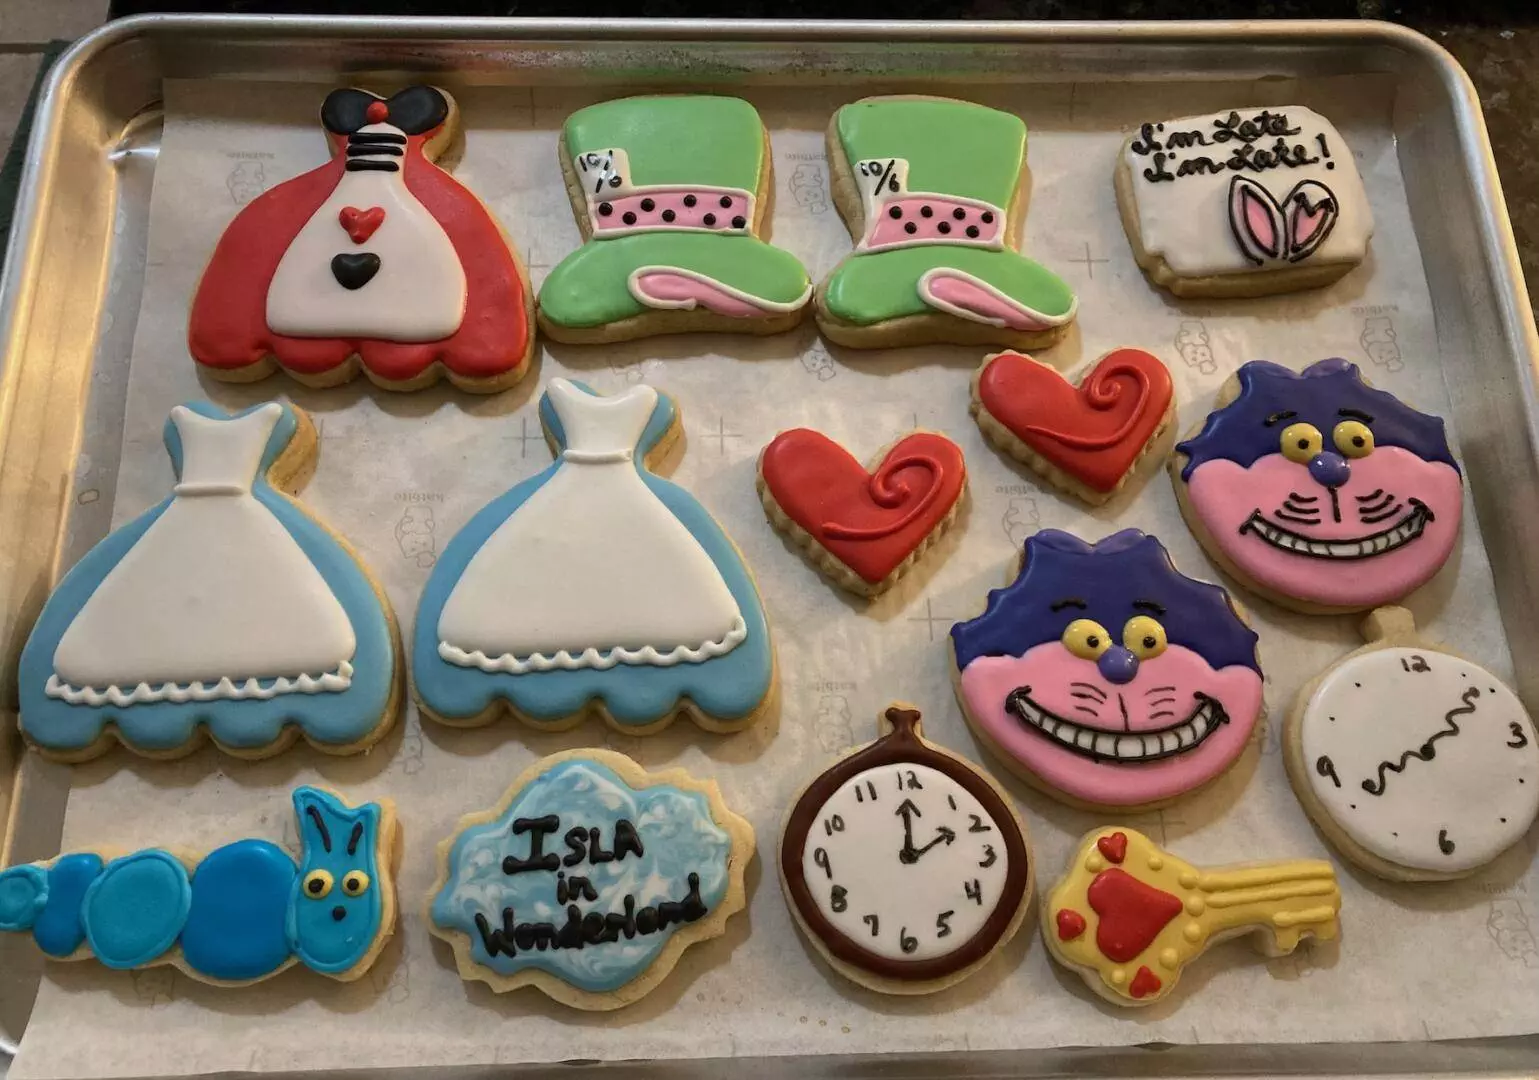 Alice in Wonderland Cookies and Cupcakes from Out of the Box Baking.com